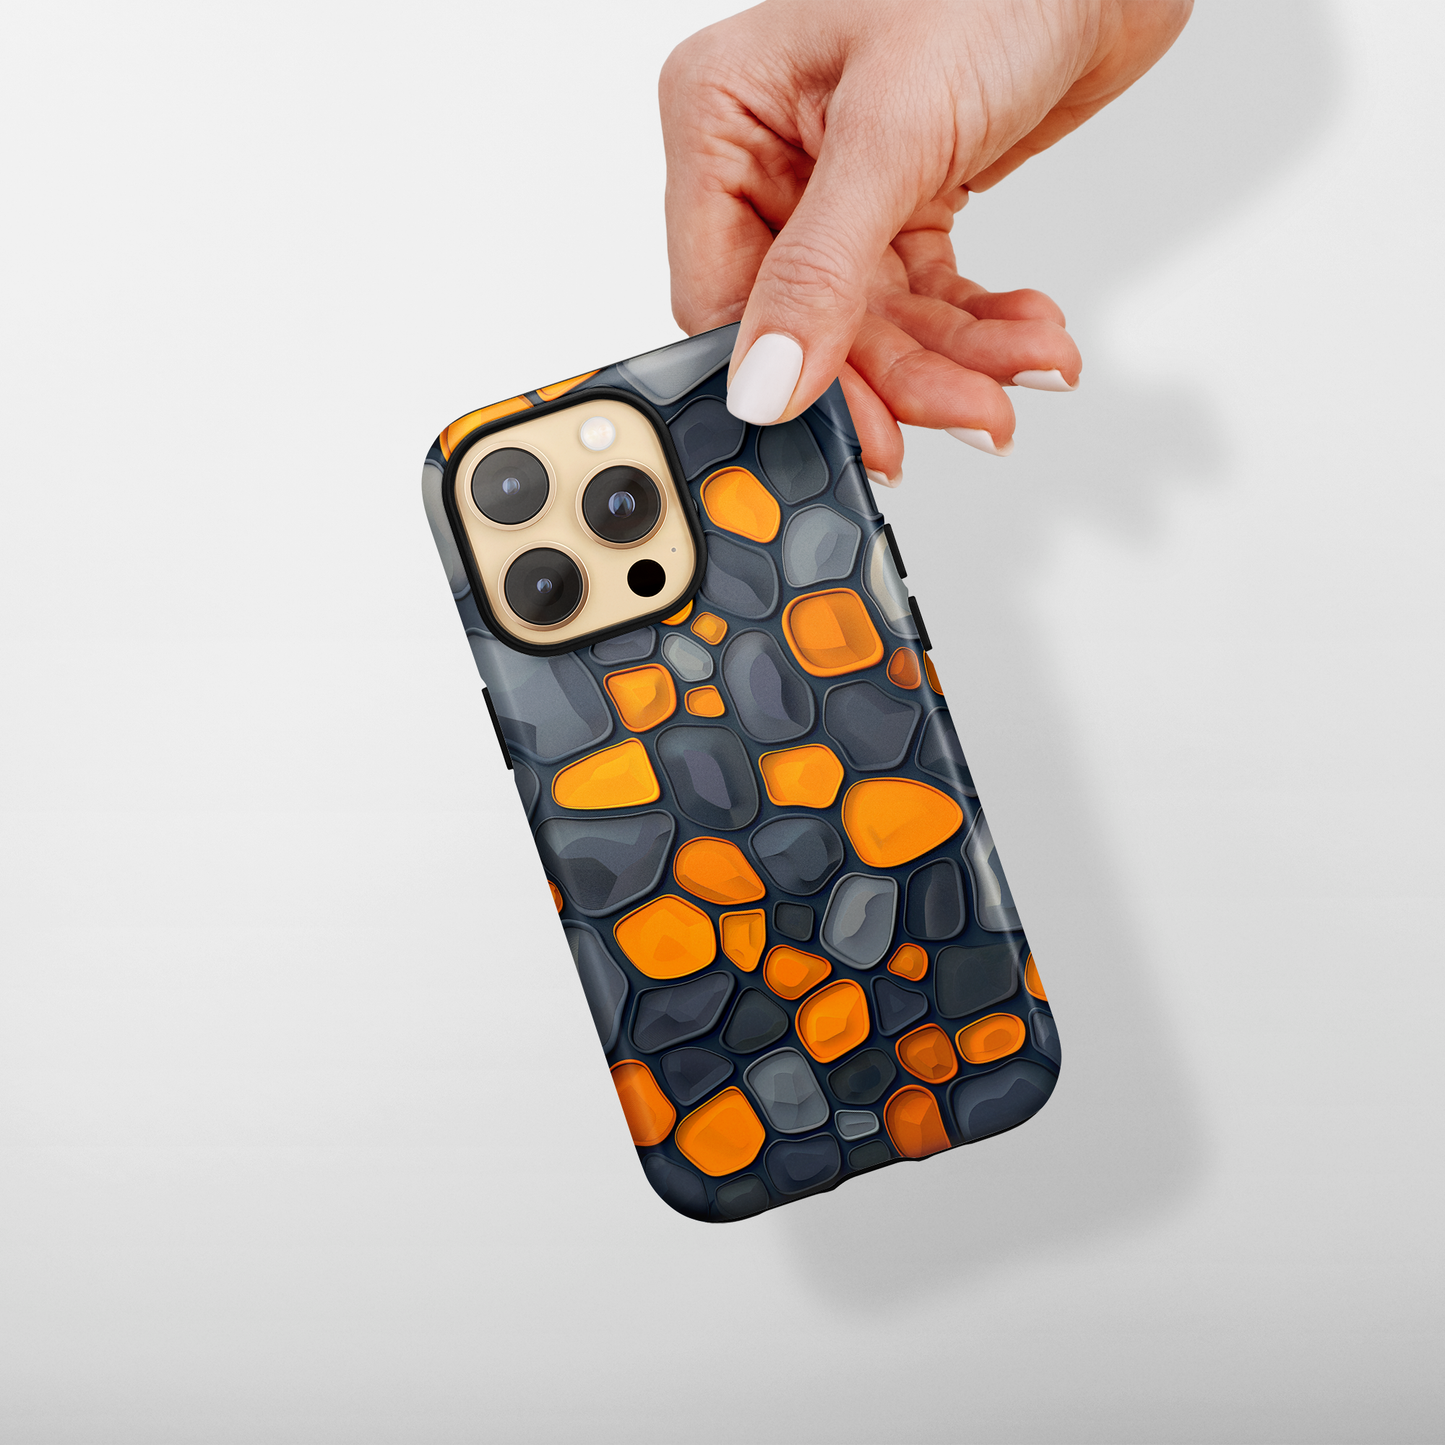 Amber Mosaic (iPhone MagSafe Case)Discover elegance with our iphone 13, 14, 15, Pro, Max MagSafe Case Lightweight, USA-made, and compatible with all MagSafe accessories. Style meets protection. RimaGallery